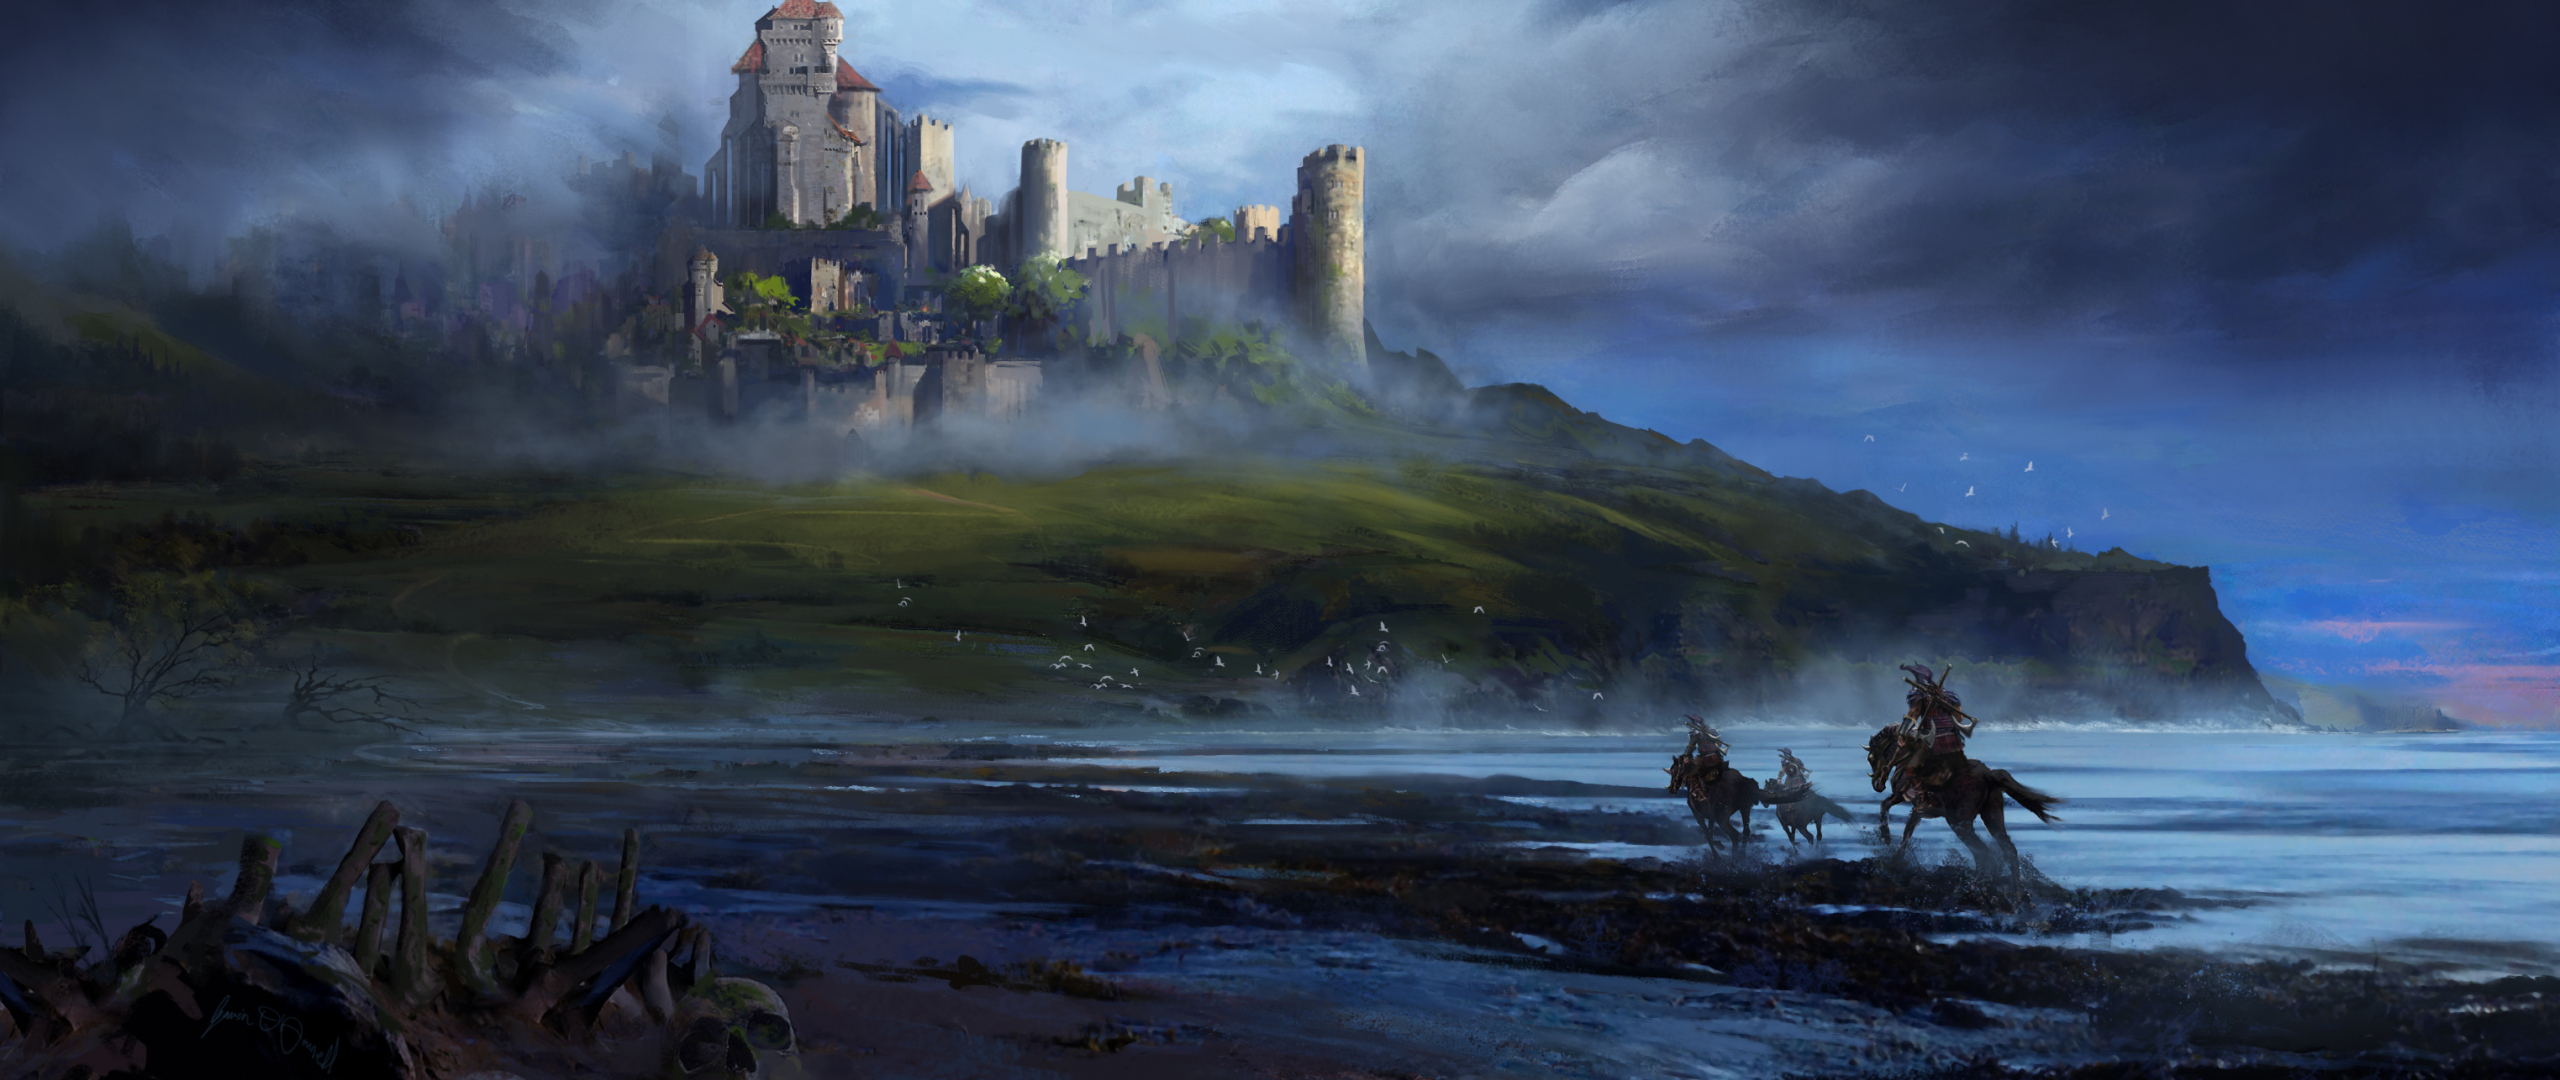 Download 2560x1080 Wallpaper Running To Castle, Warrior, Coast, Fantasy  Art, Dual Wide, Widescreen, 2560x1080 Hd Image, Background, 34353